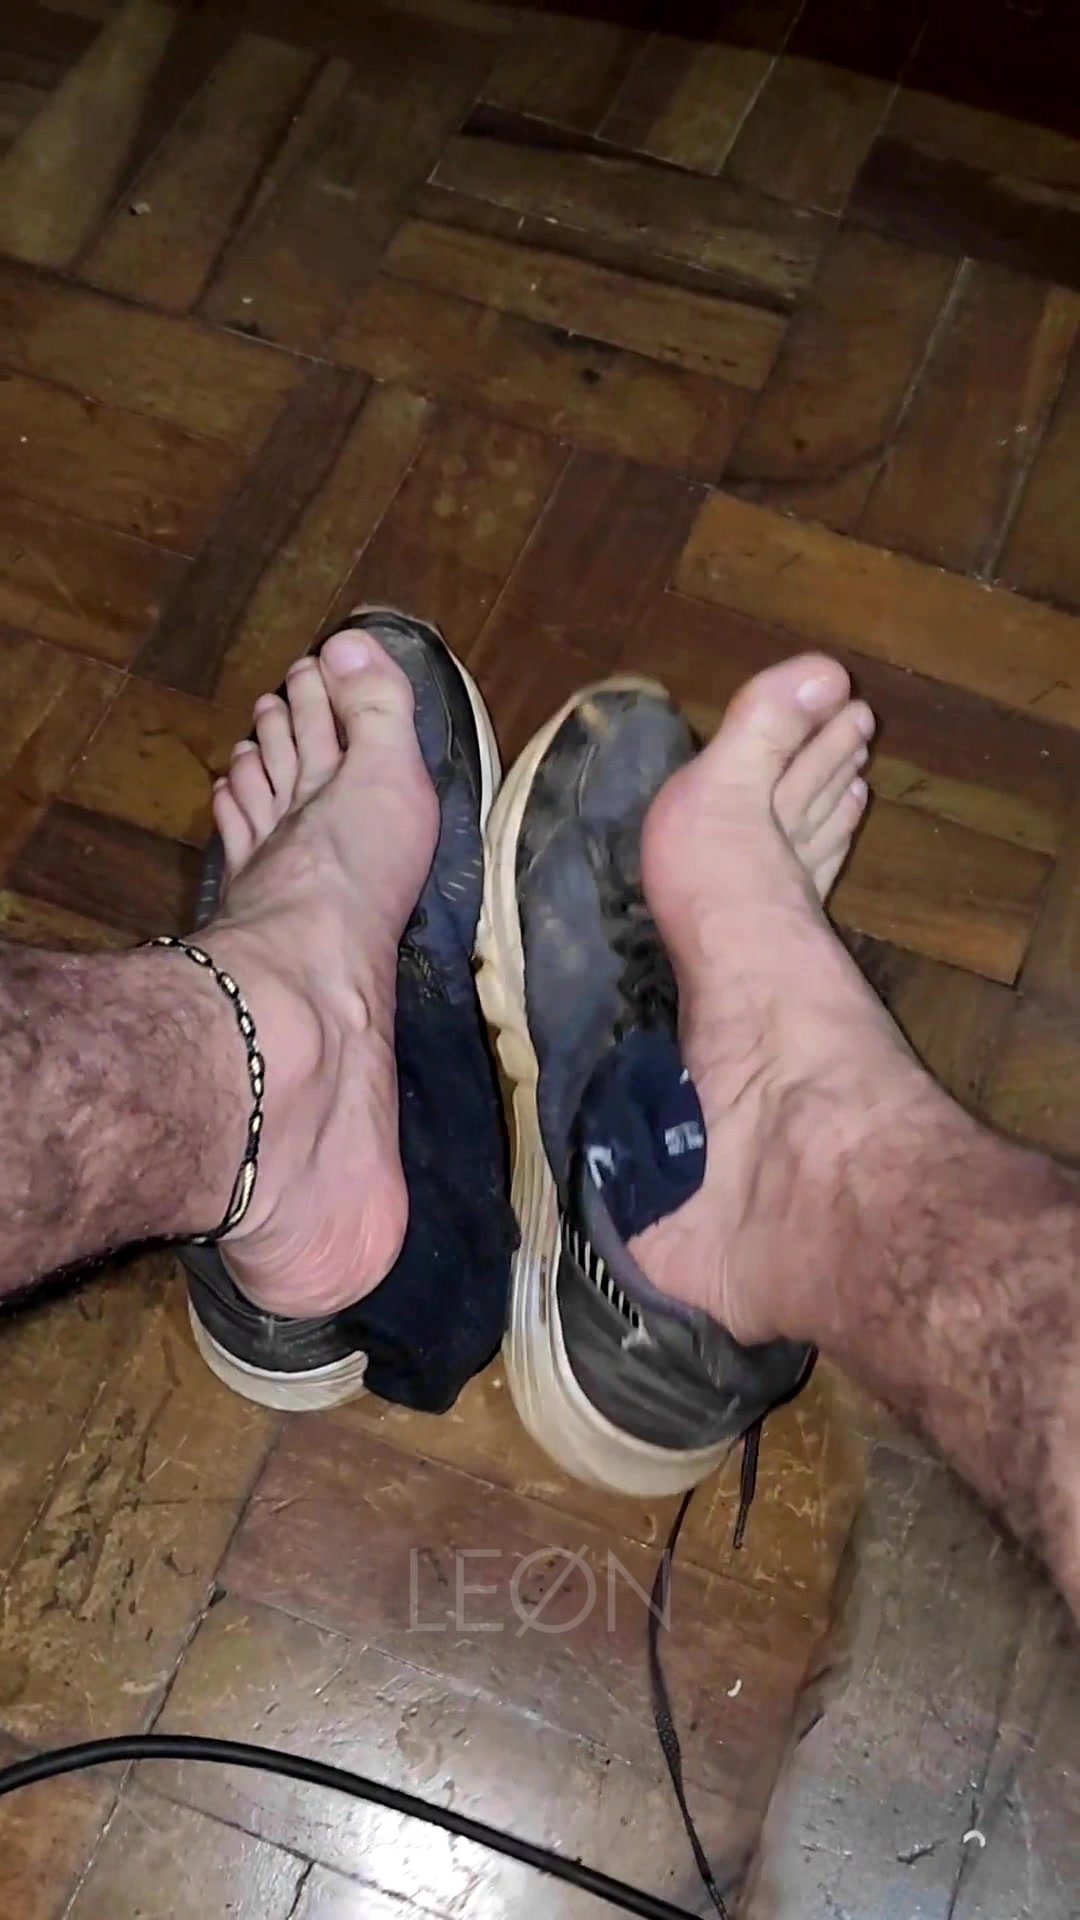 Smelly feet, sneakers, socks and flip-flops